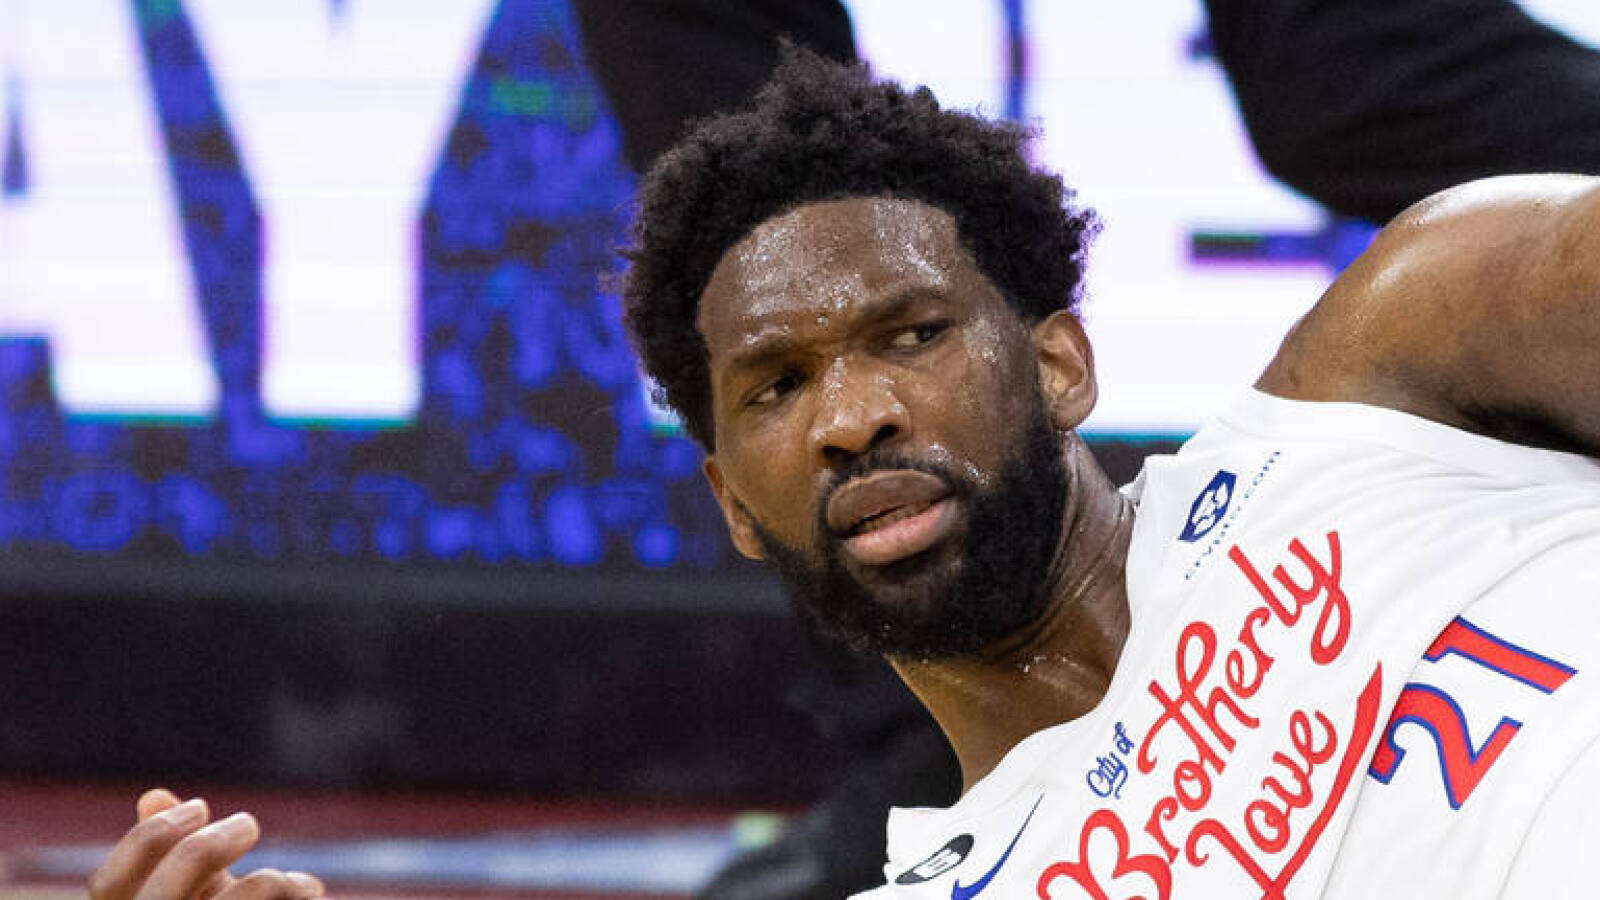 76ers star Joel Embiid makes NBA history in 59-point performance